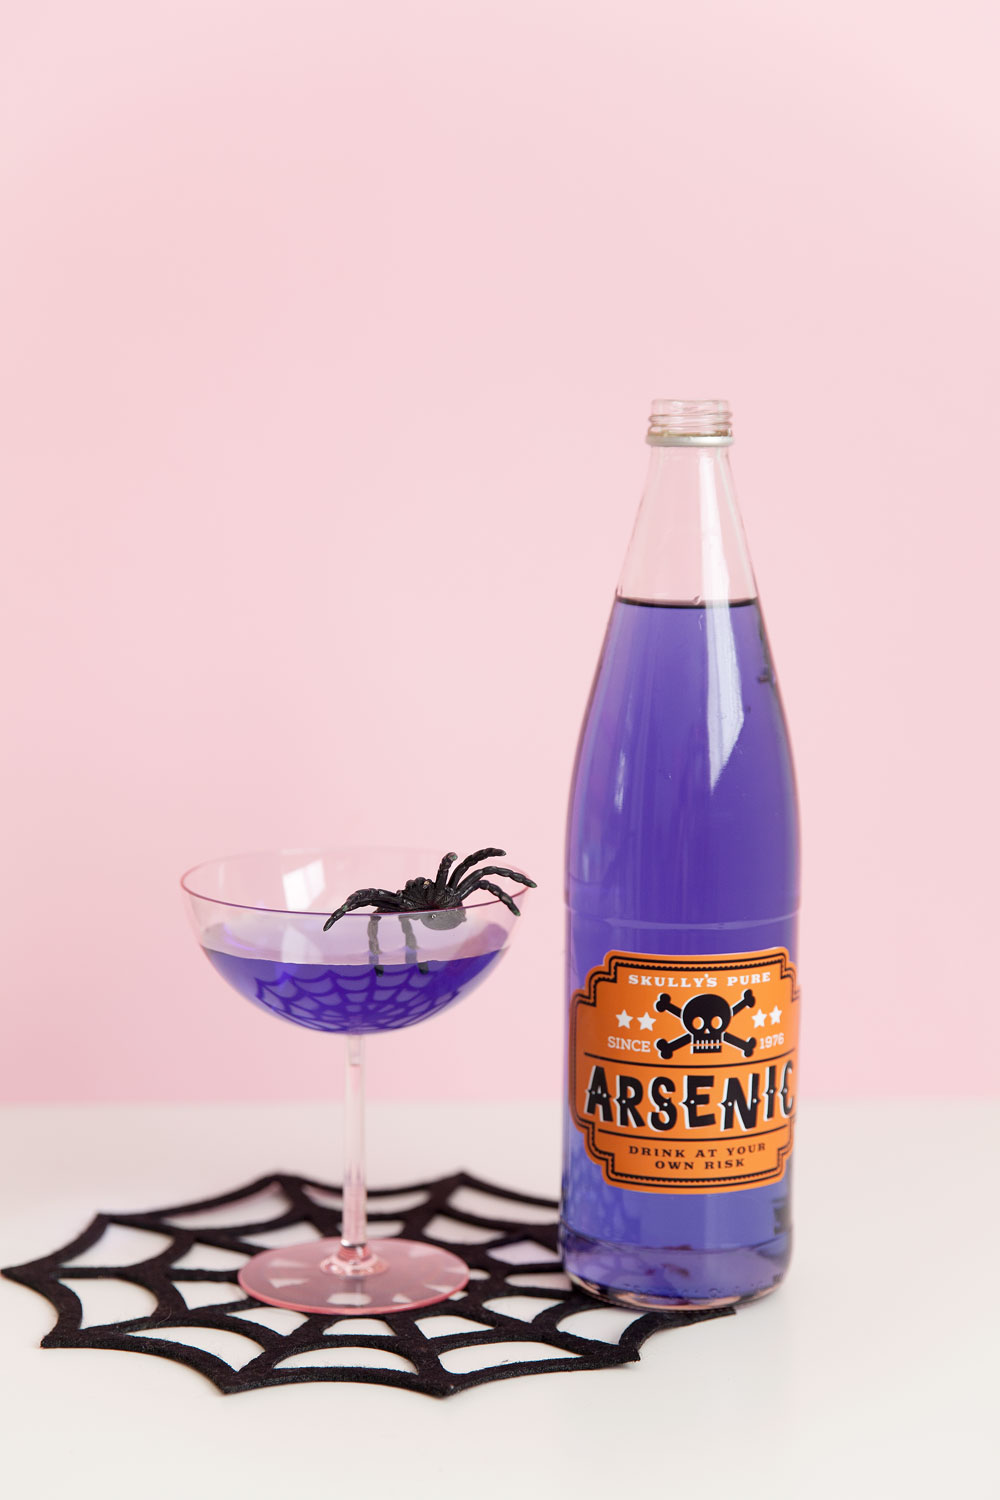 Make any halloween gathering more fun with these free printable Halloween drink labels. Stick them on any bottle and they instantly become a spooky treat.